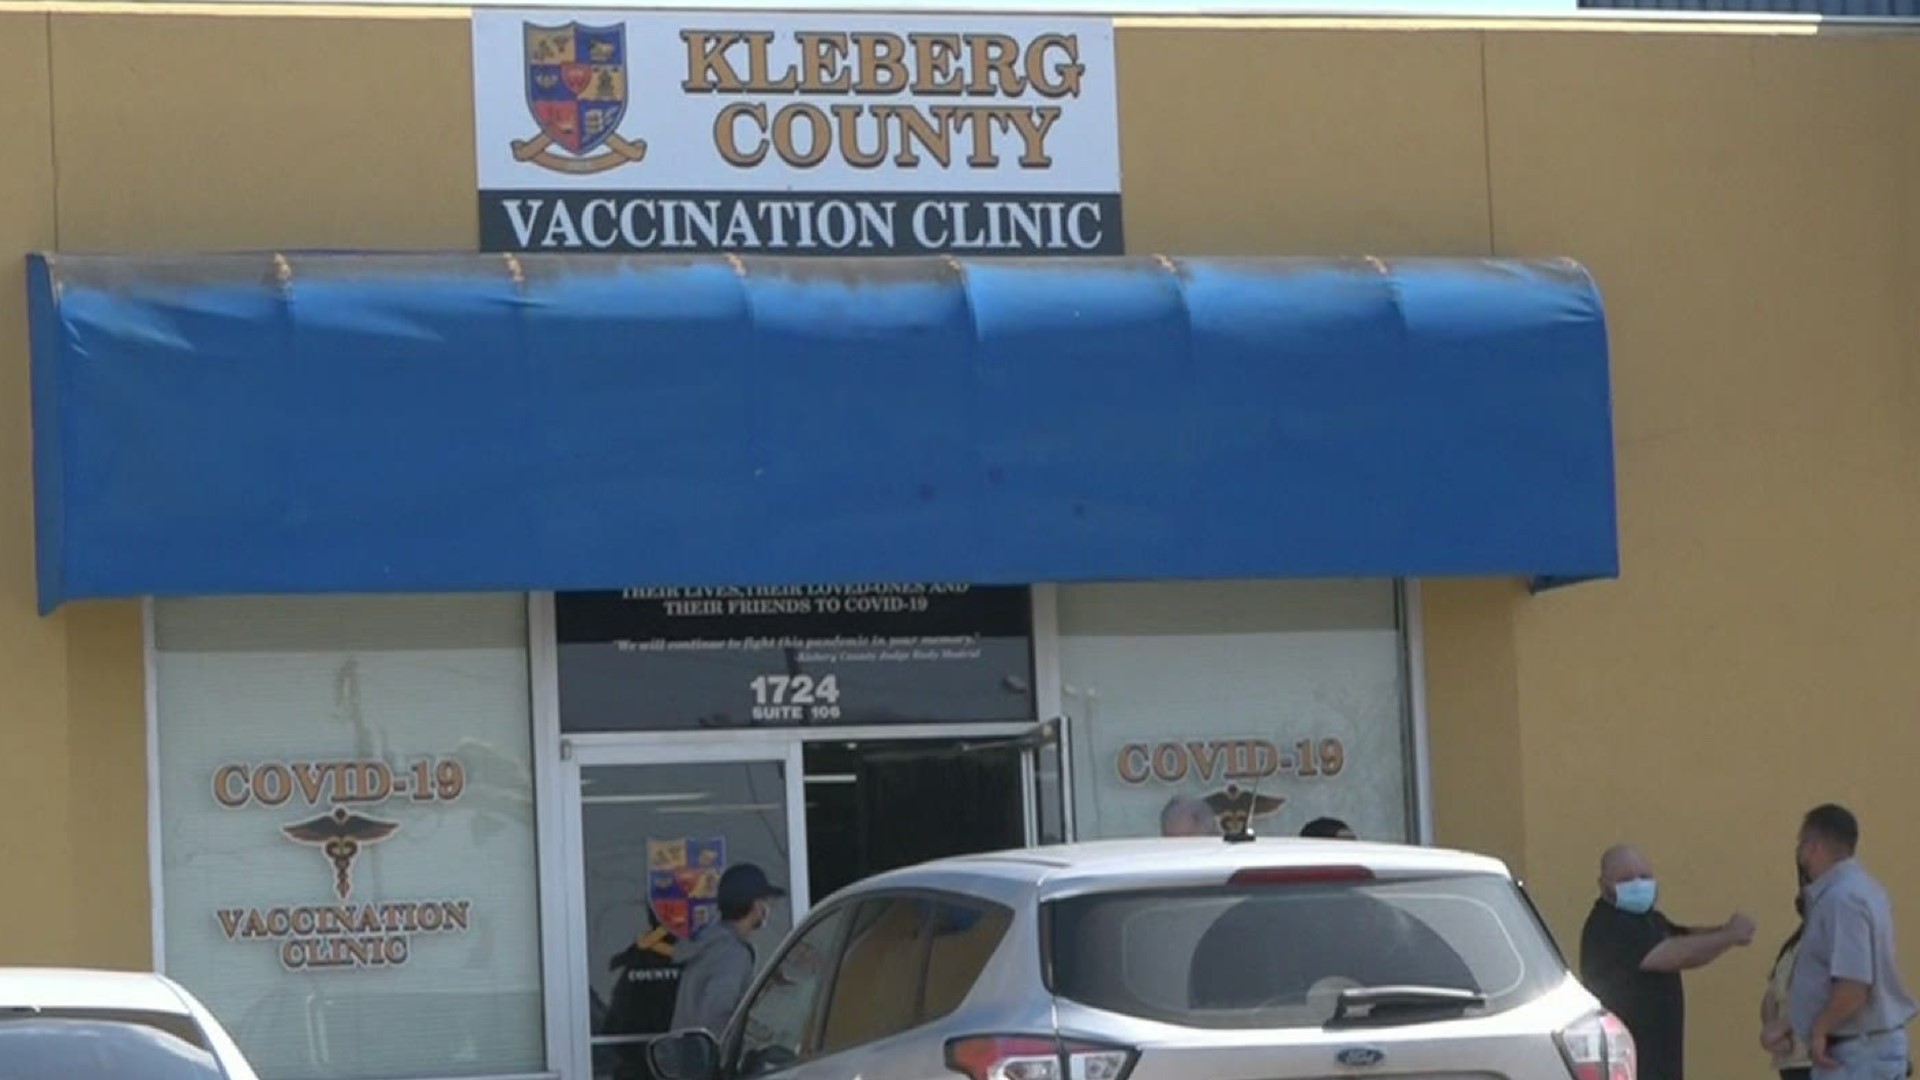 Organizers plan on vaccinating 200 people daily.